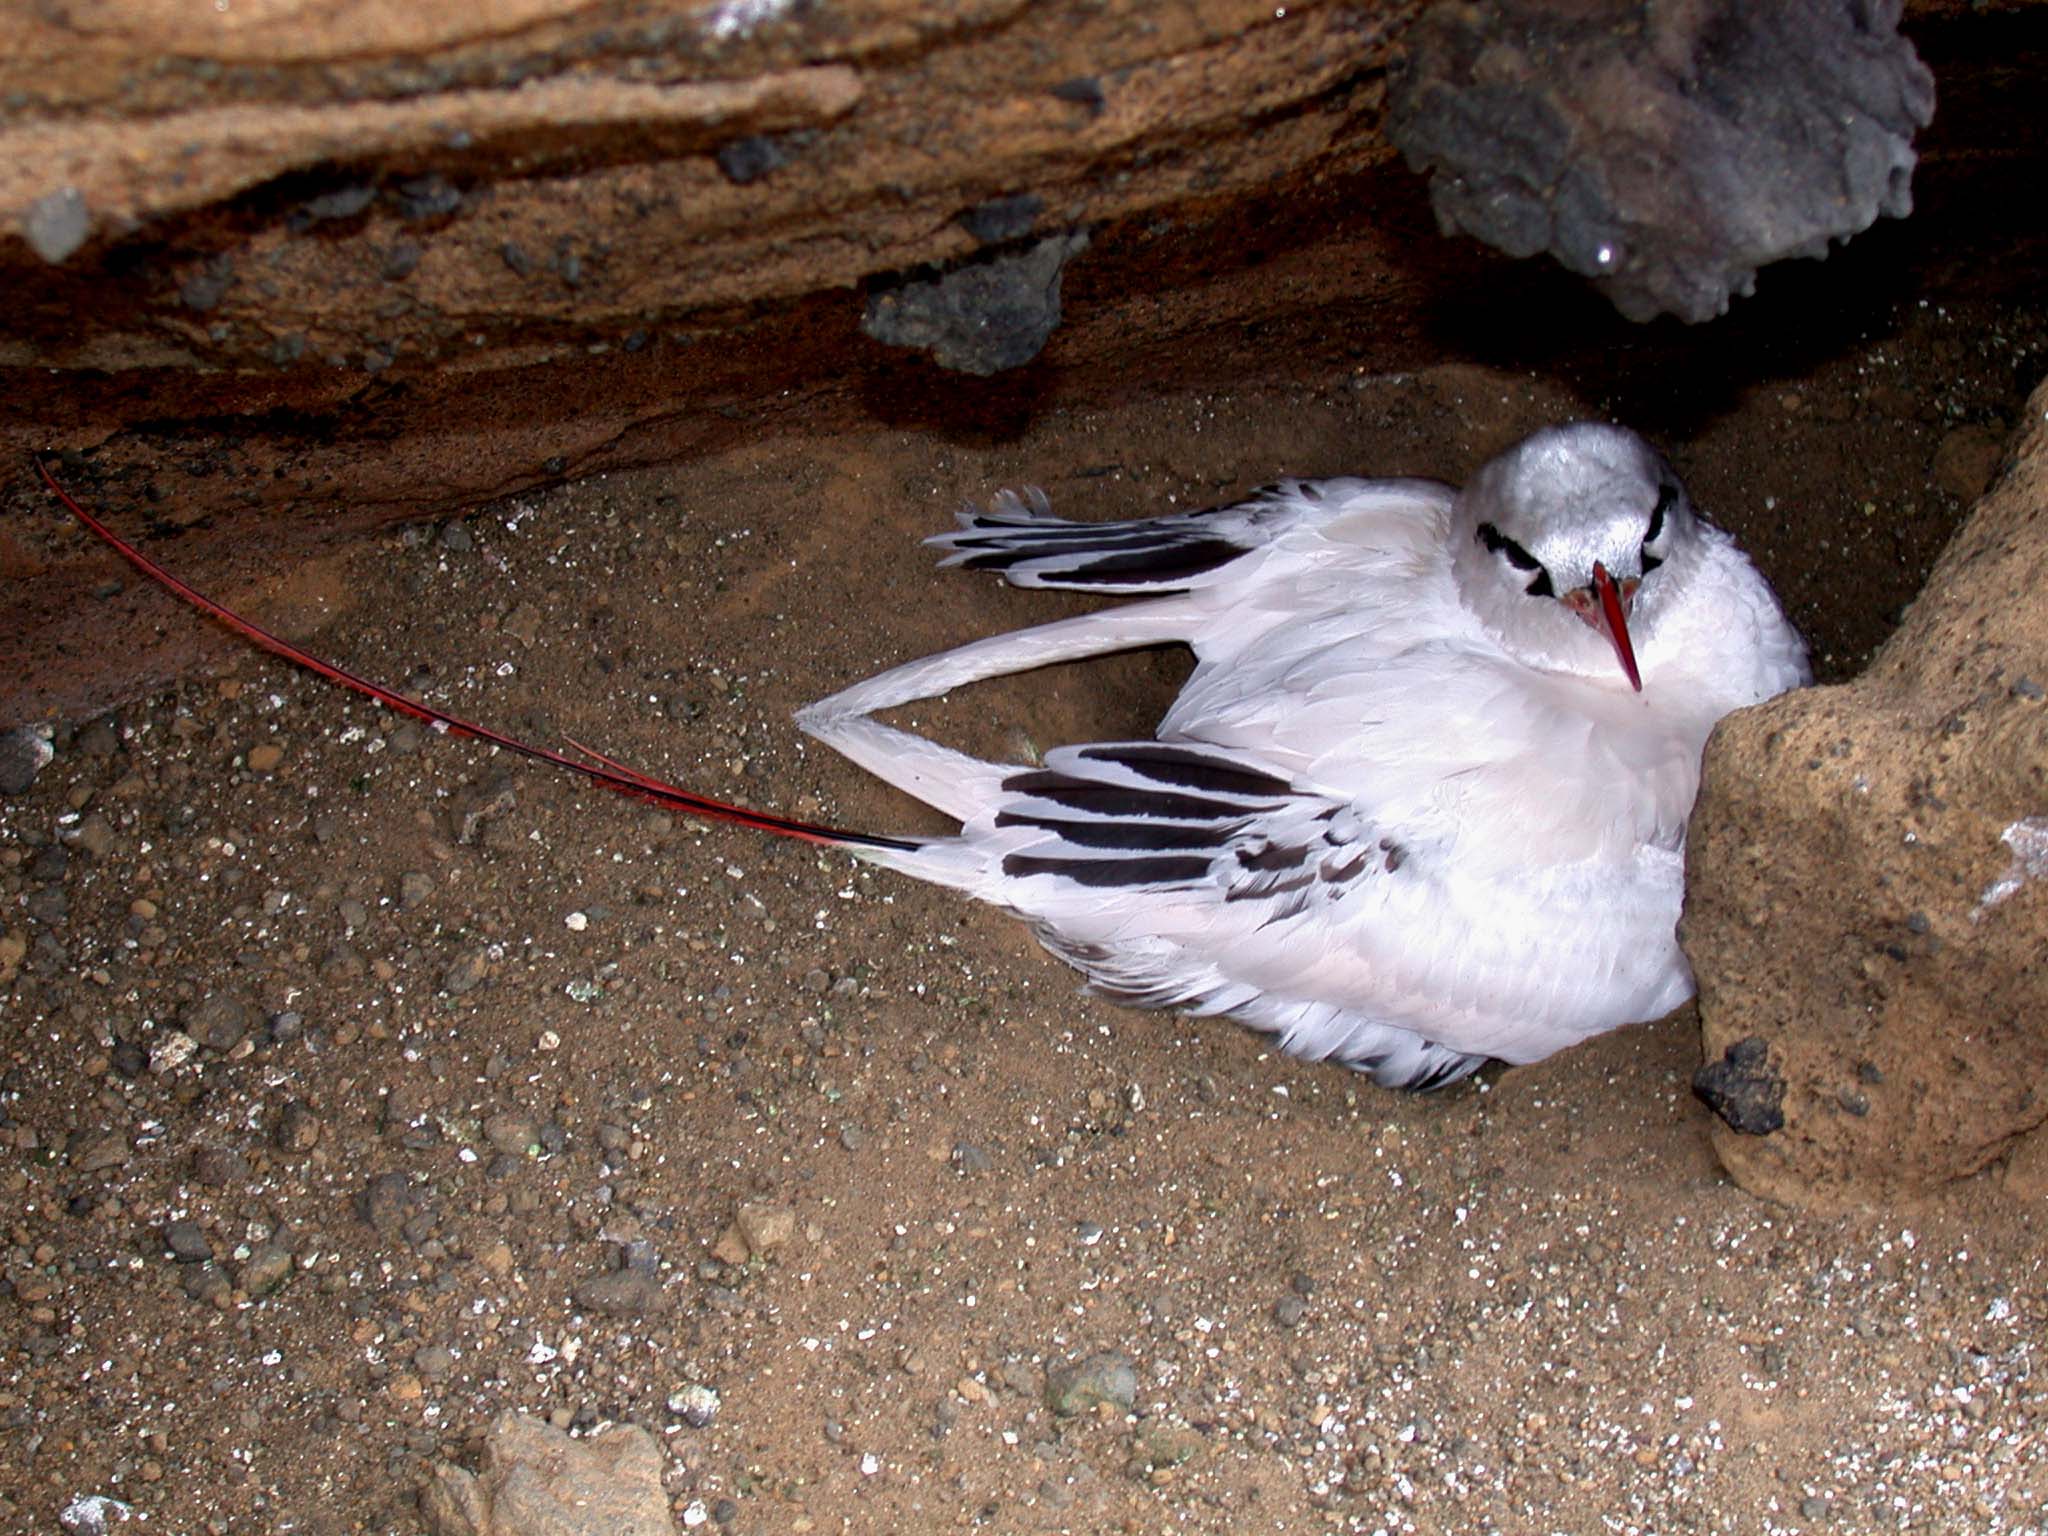 image of a red-tailed tropicbird